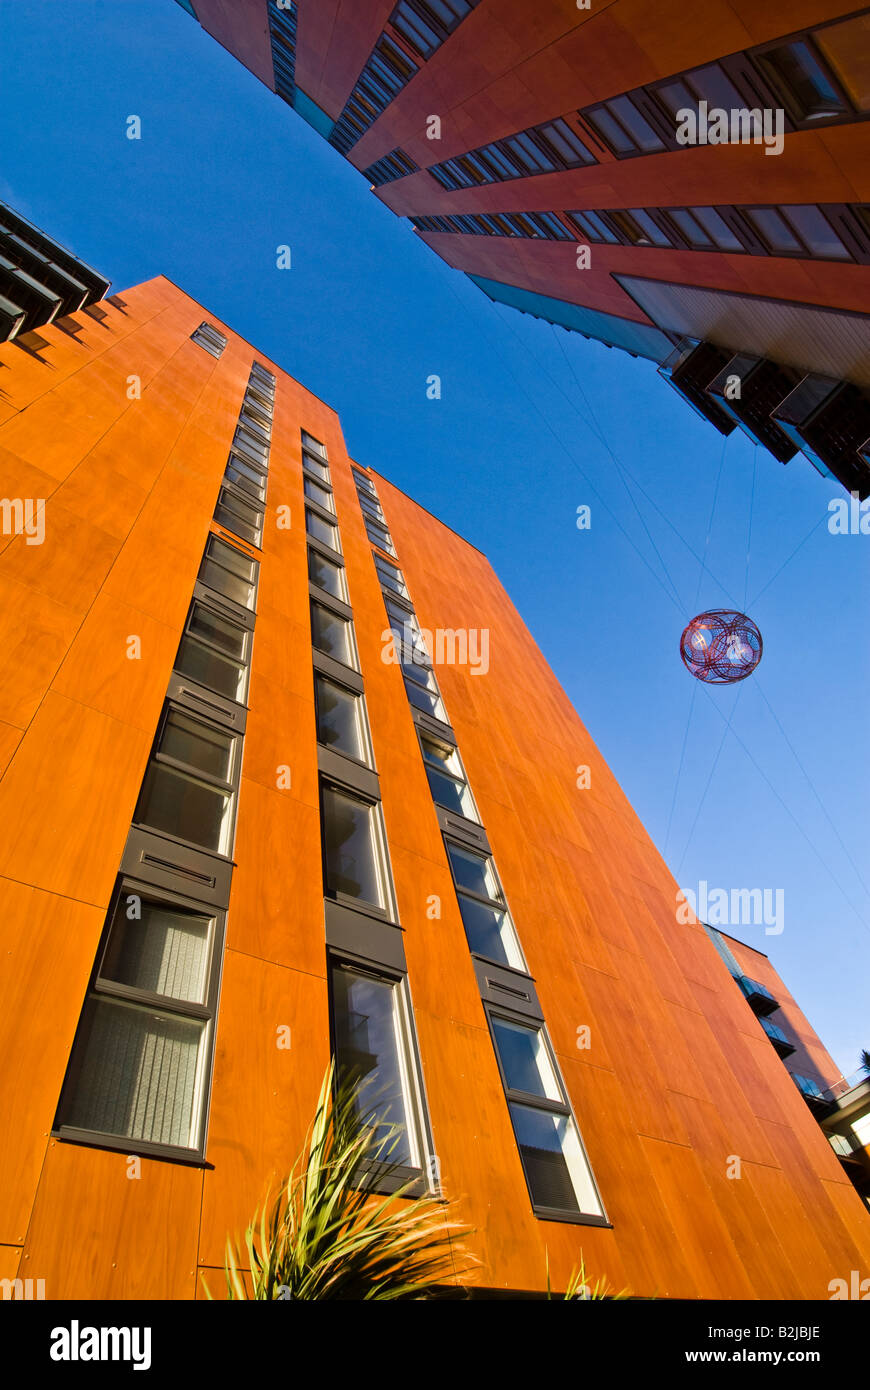 Skyline central apartments, Manchester, England Stock Photo